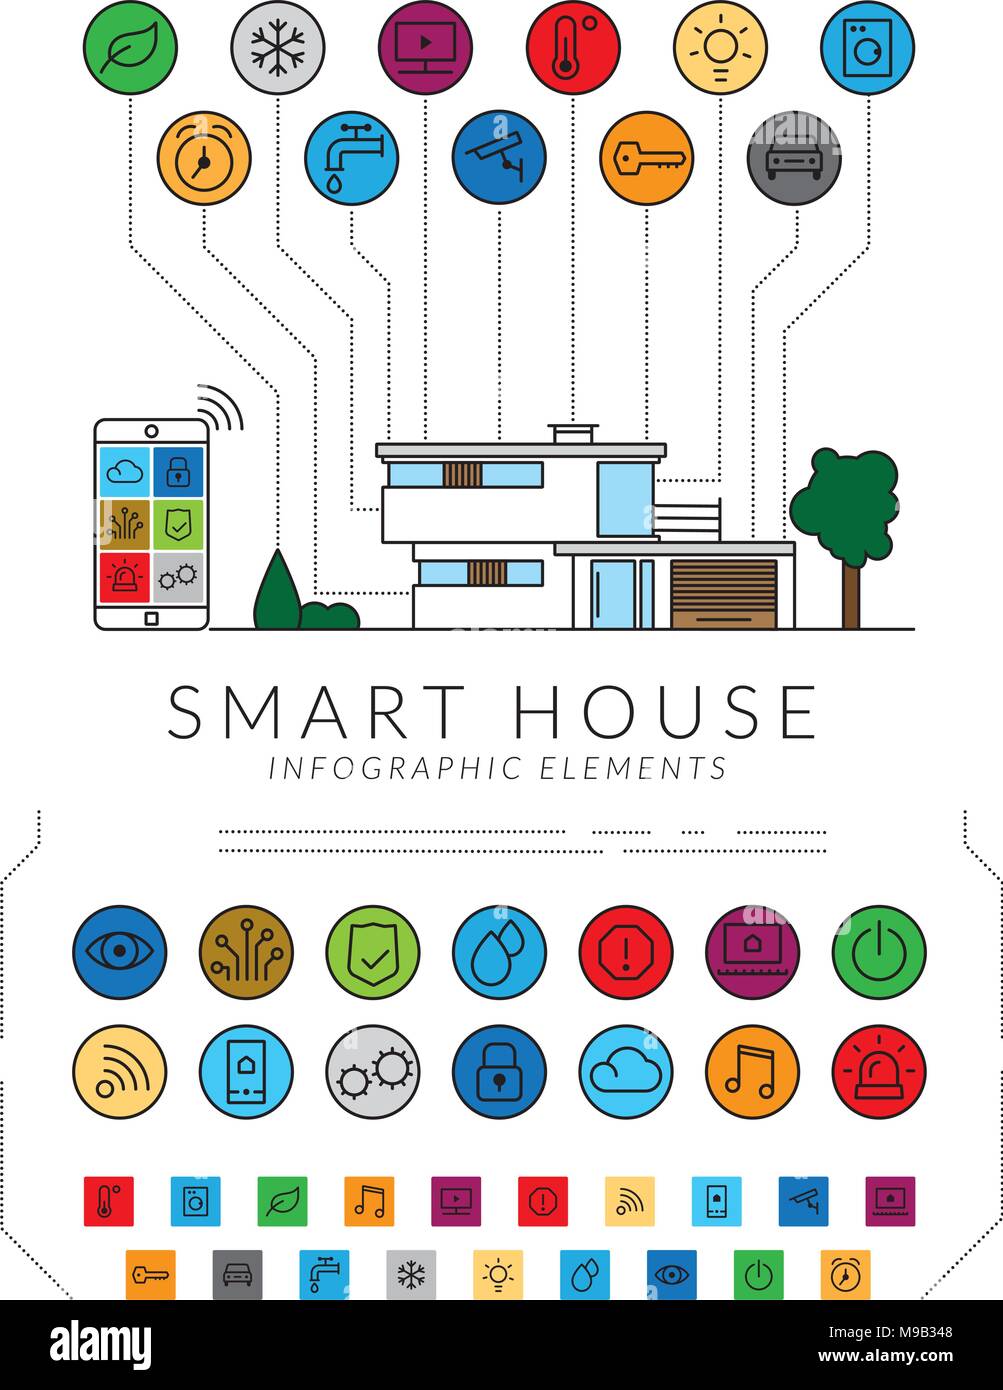 Smart Home Concept Flat Vector Infographic Design Elements and Illustration. All objects on separate layers. Stock Vector